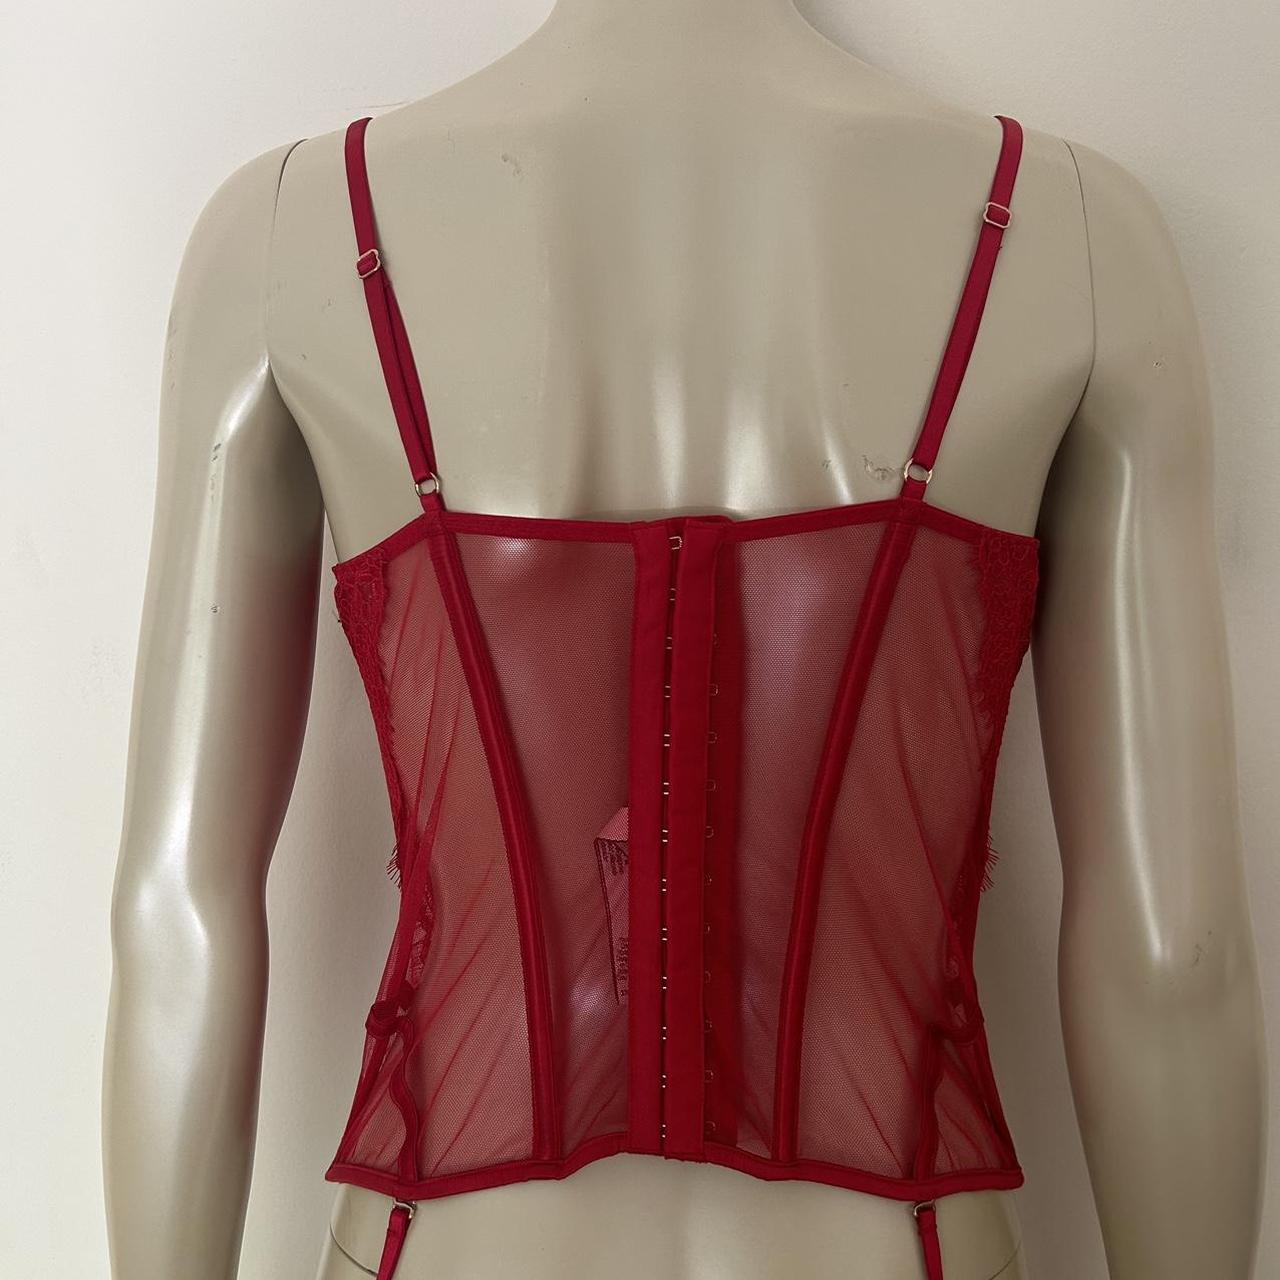 Victoria’s Secret Wicked Unlined Lace-Up Corset Top